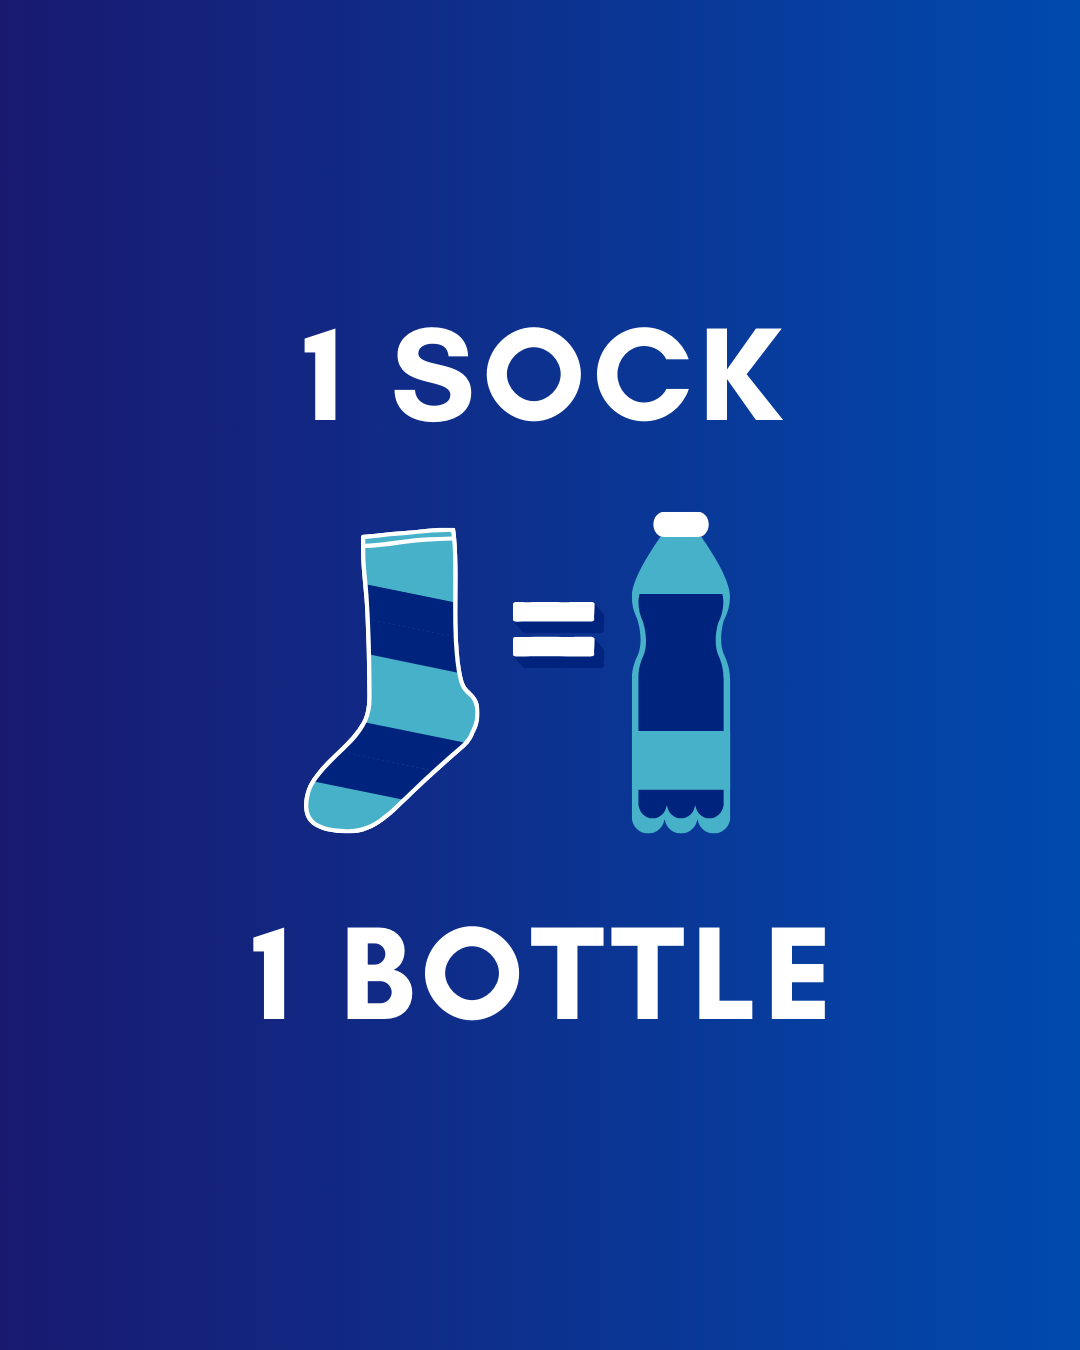 Ecofriendly socks made from recycled plastic bottles